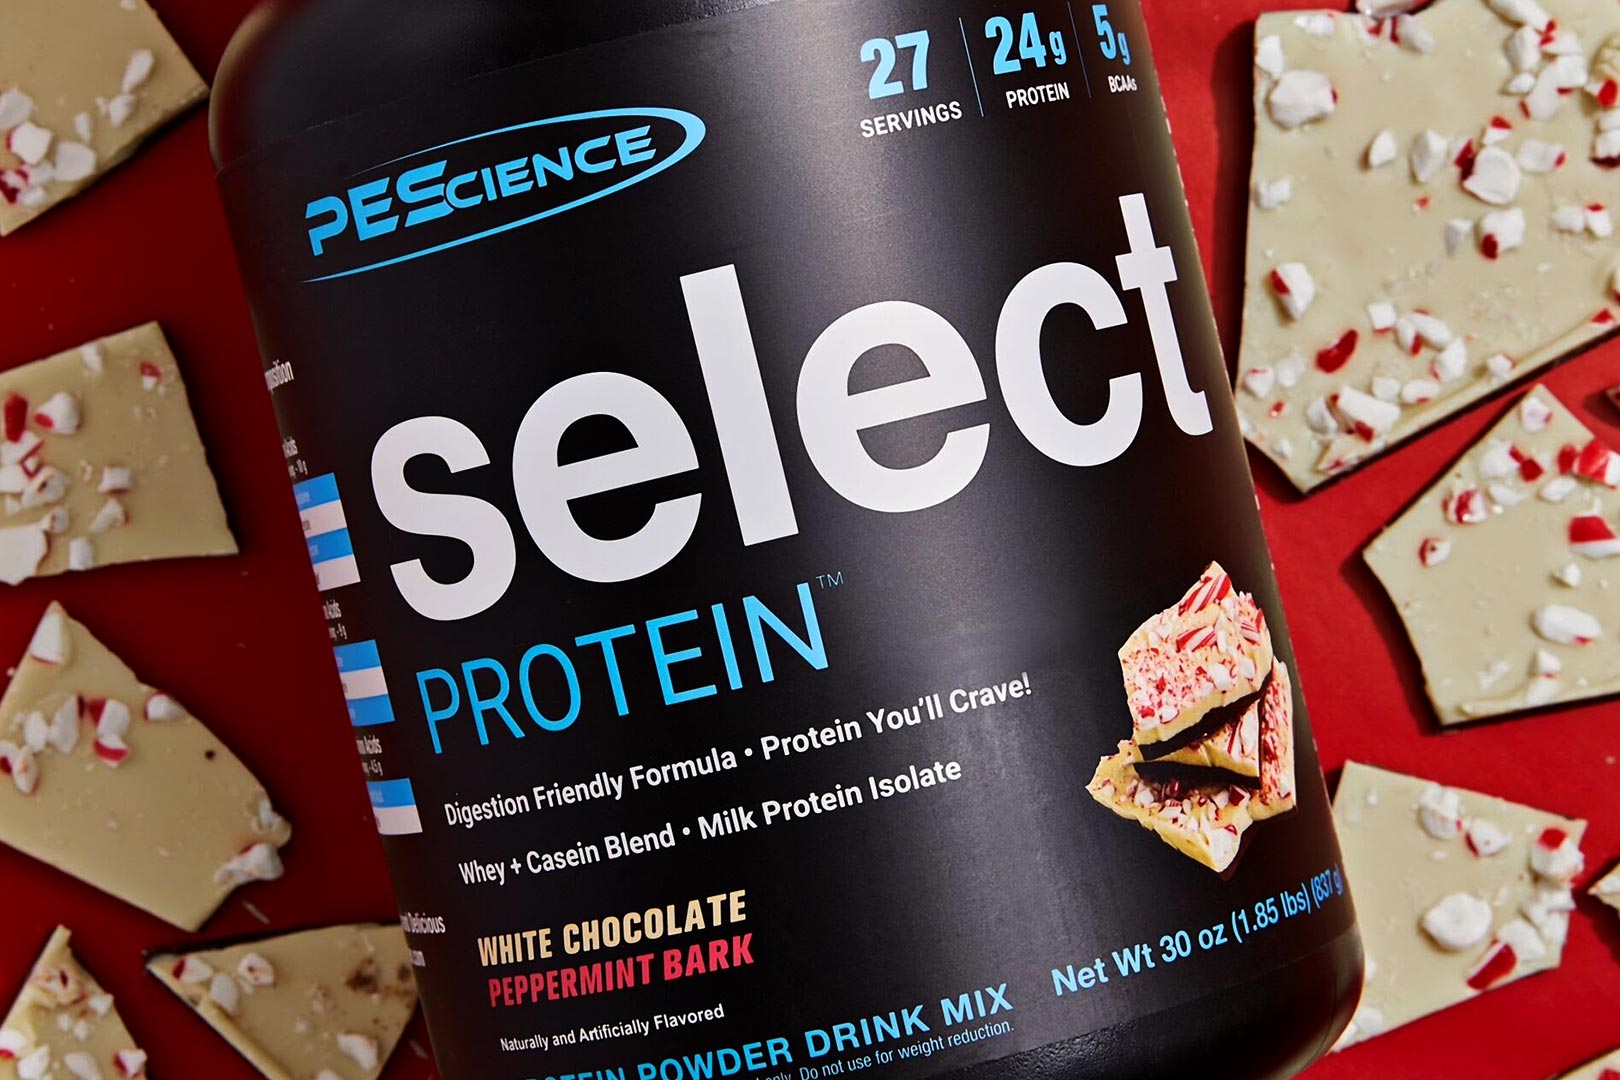 PEScience's White Chocolate Peppermint Bark Select Protein is back